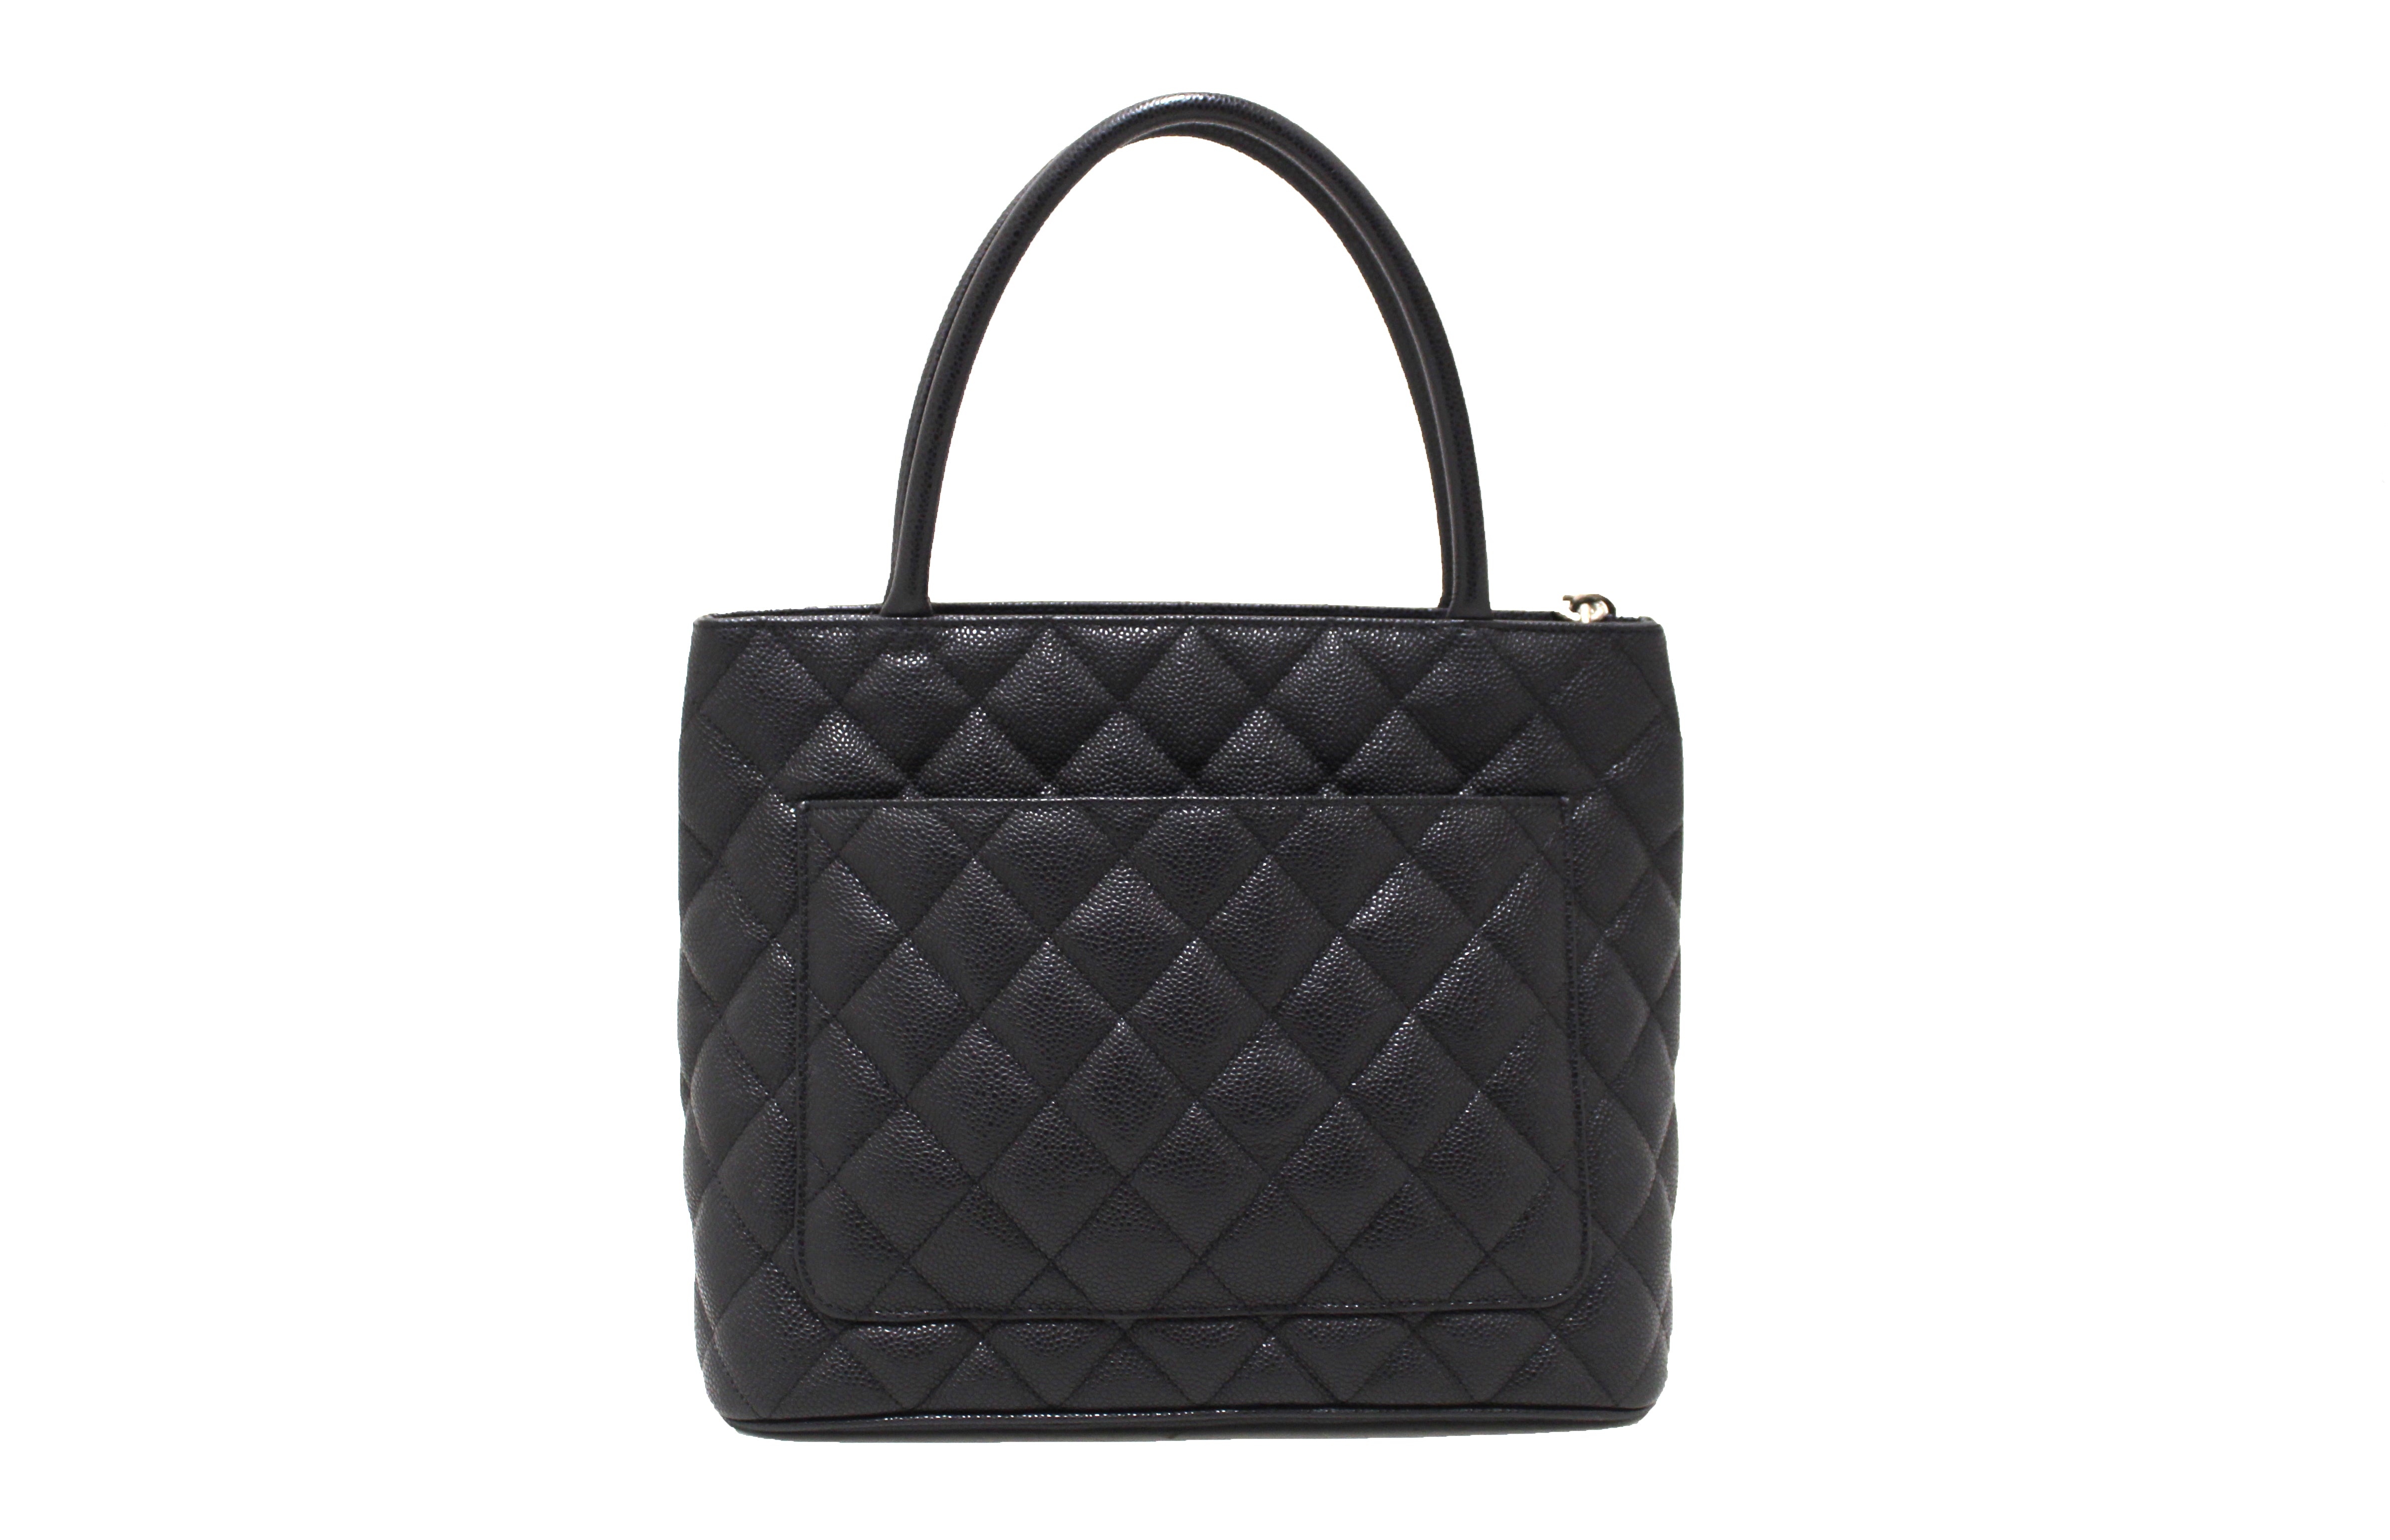 Authentic Chanel Black Quilted Caviar Leather Medallion Tote Bag